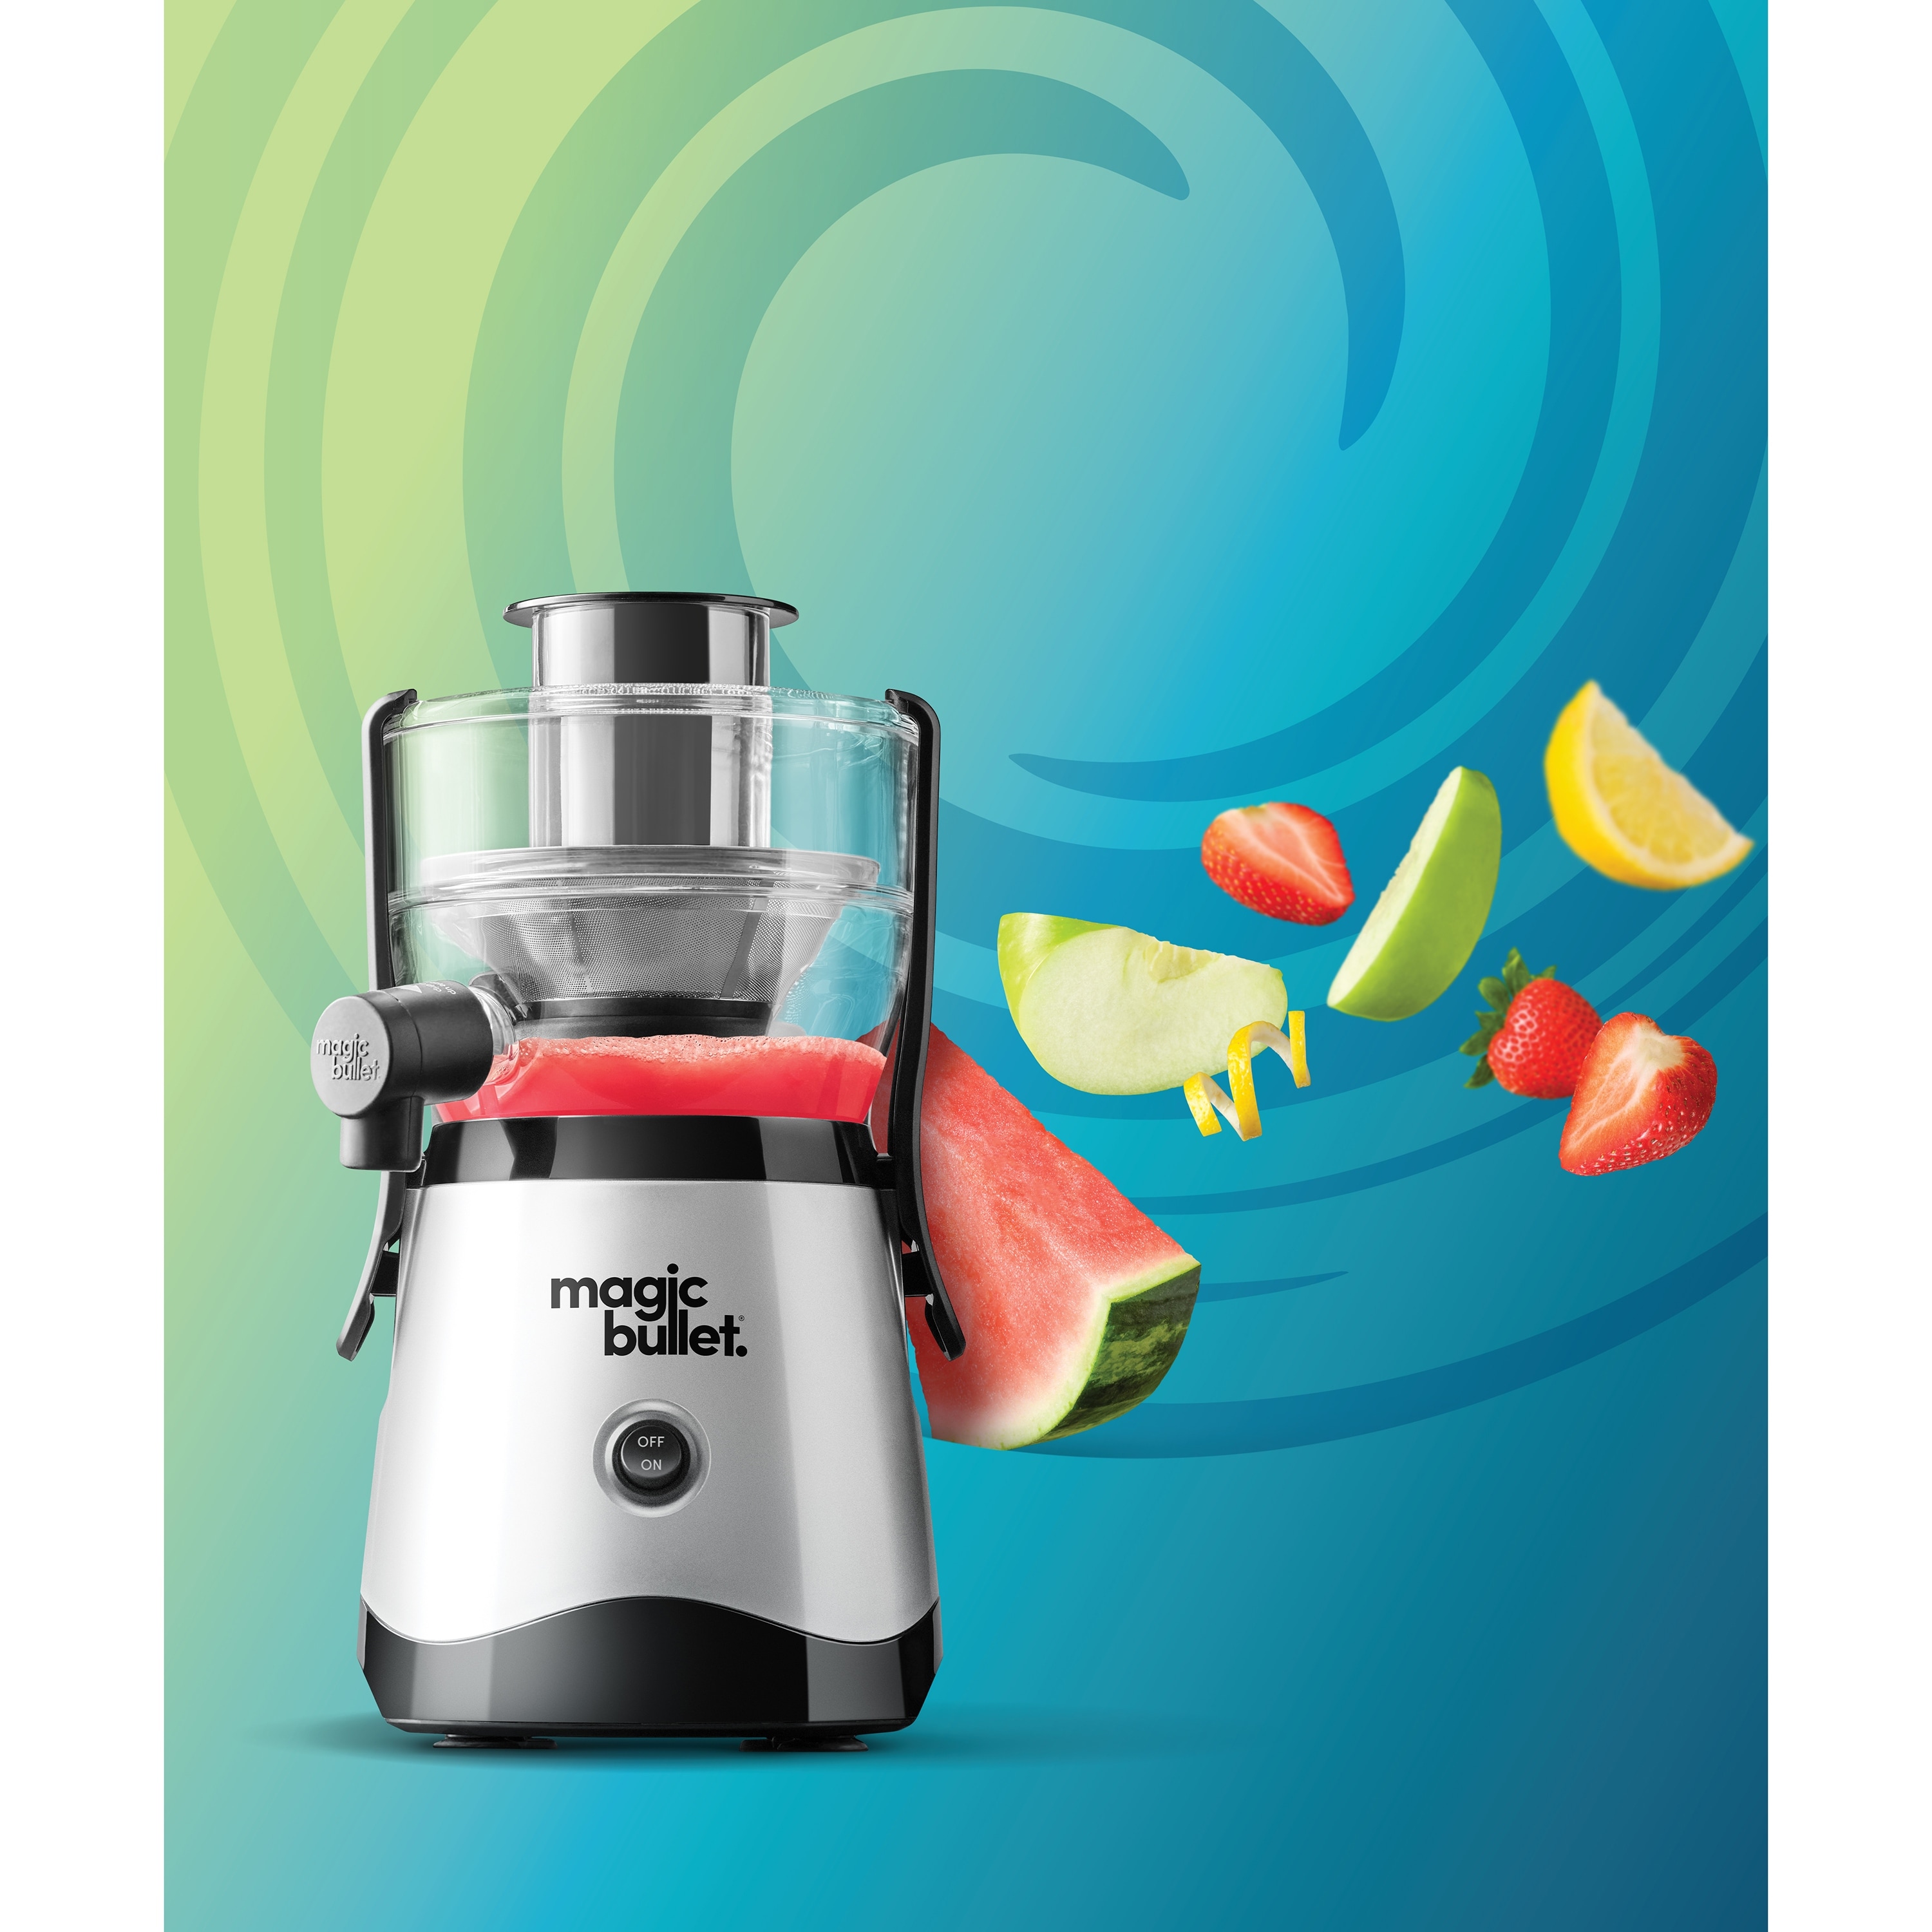 https://ak1.ostkcdn.com/images/products/is/images/direct/d3c9389416b17e61a11a4ca6d75d0e8052dfa9cc/Magic-Bullet-Mini-Juicer.jpg